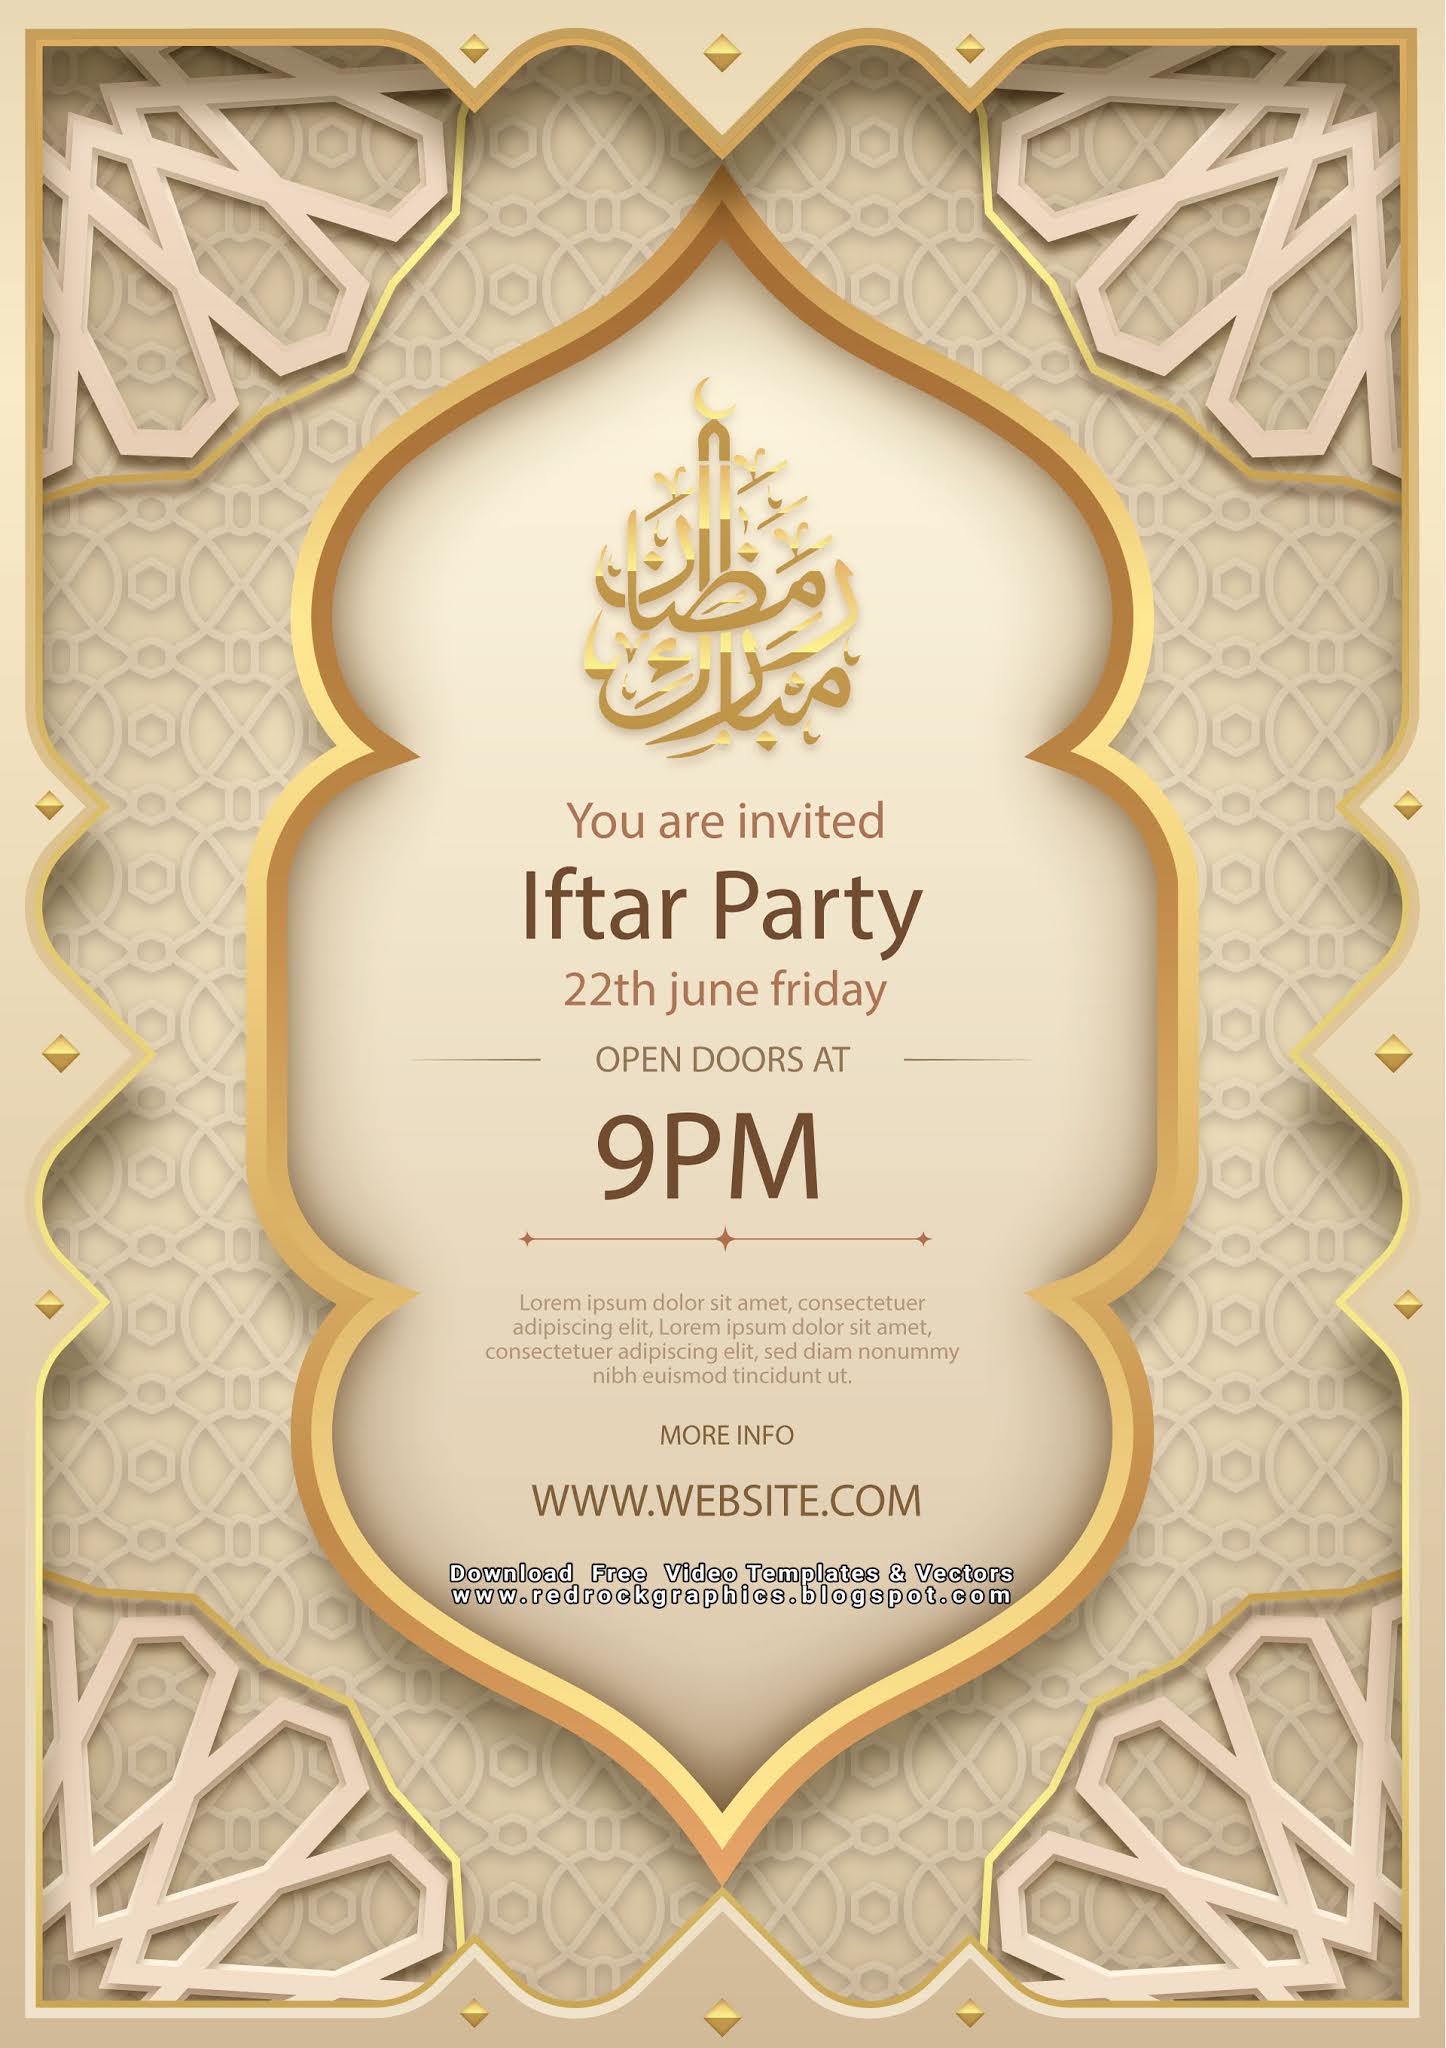 iftar-invitation-template-in-paper-style-by-red-rock-graphics